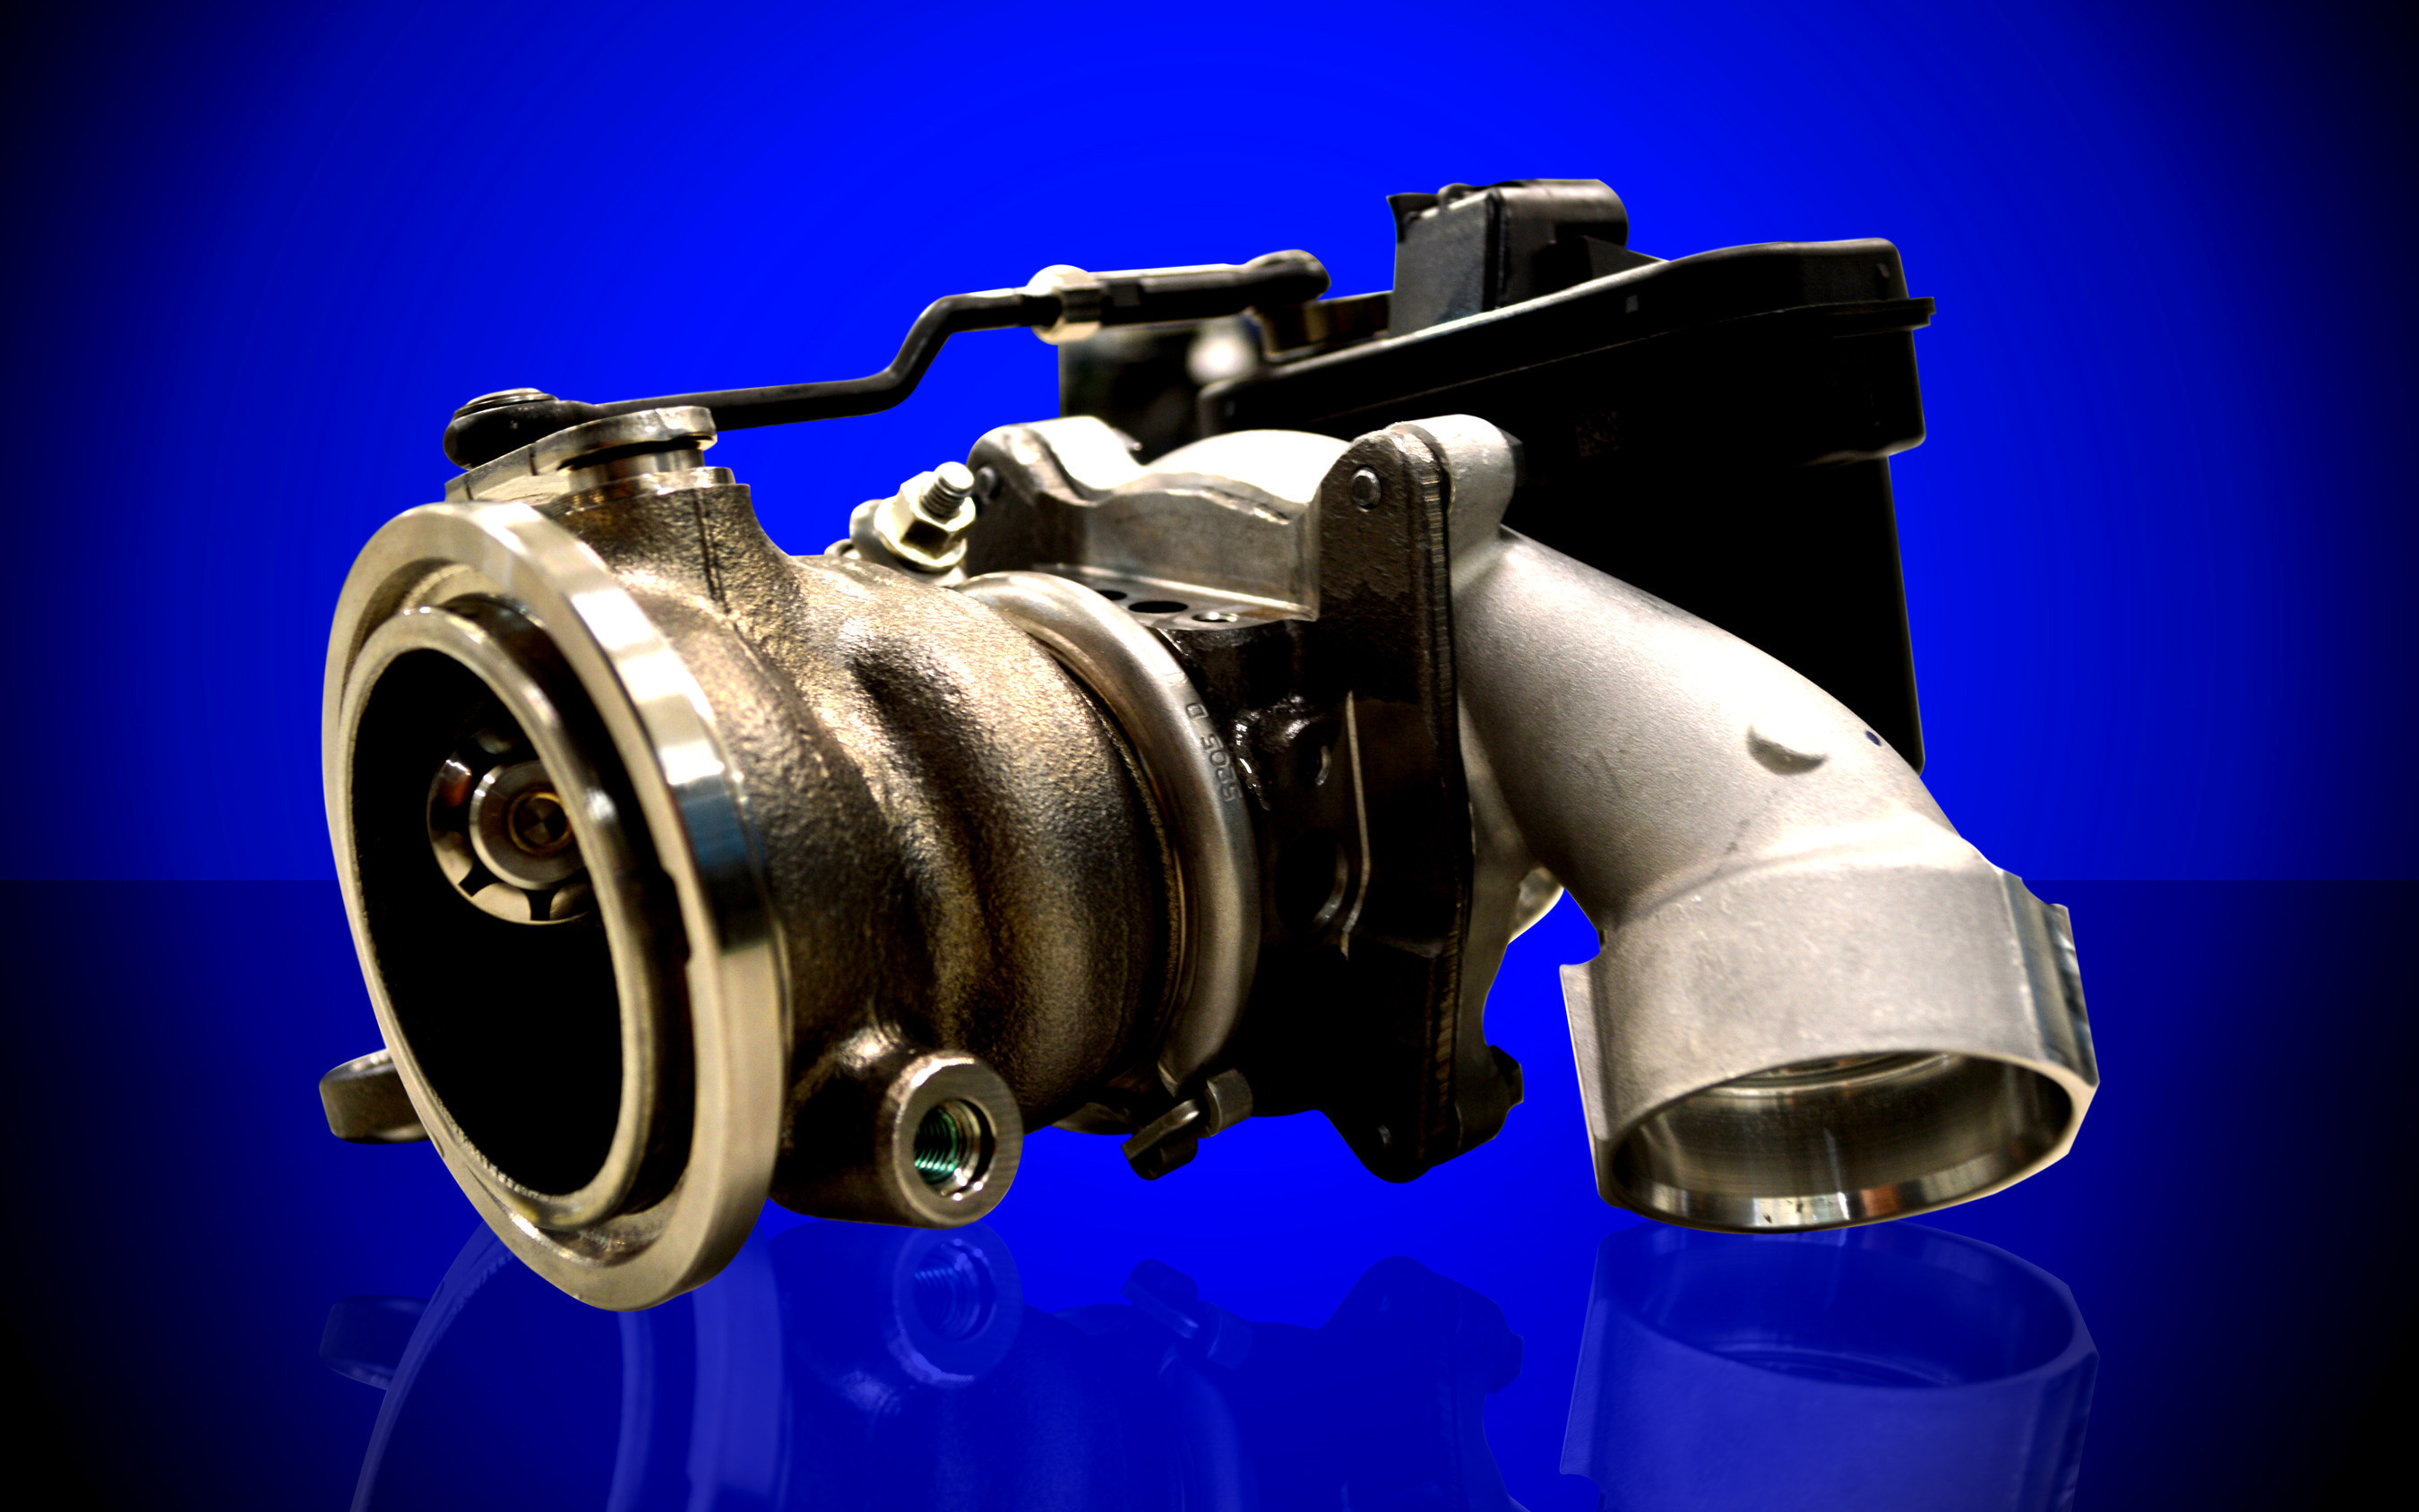 BorgWarner has developed the first flex fuel turbocharger made in Brazil to help automakers comply with the country's INOVAR-AUTO requirements.